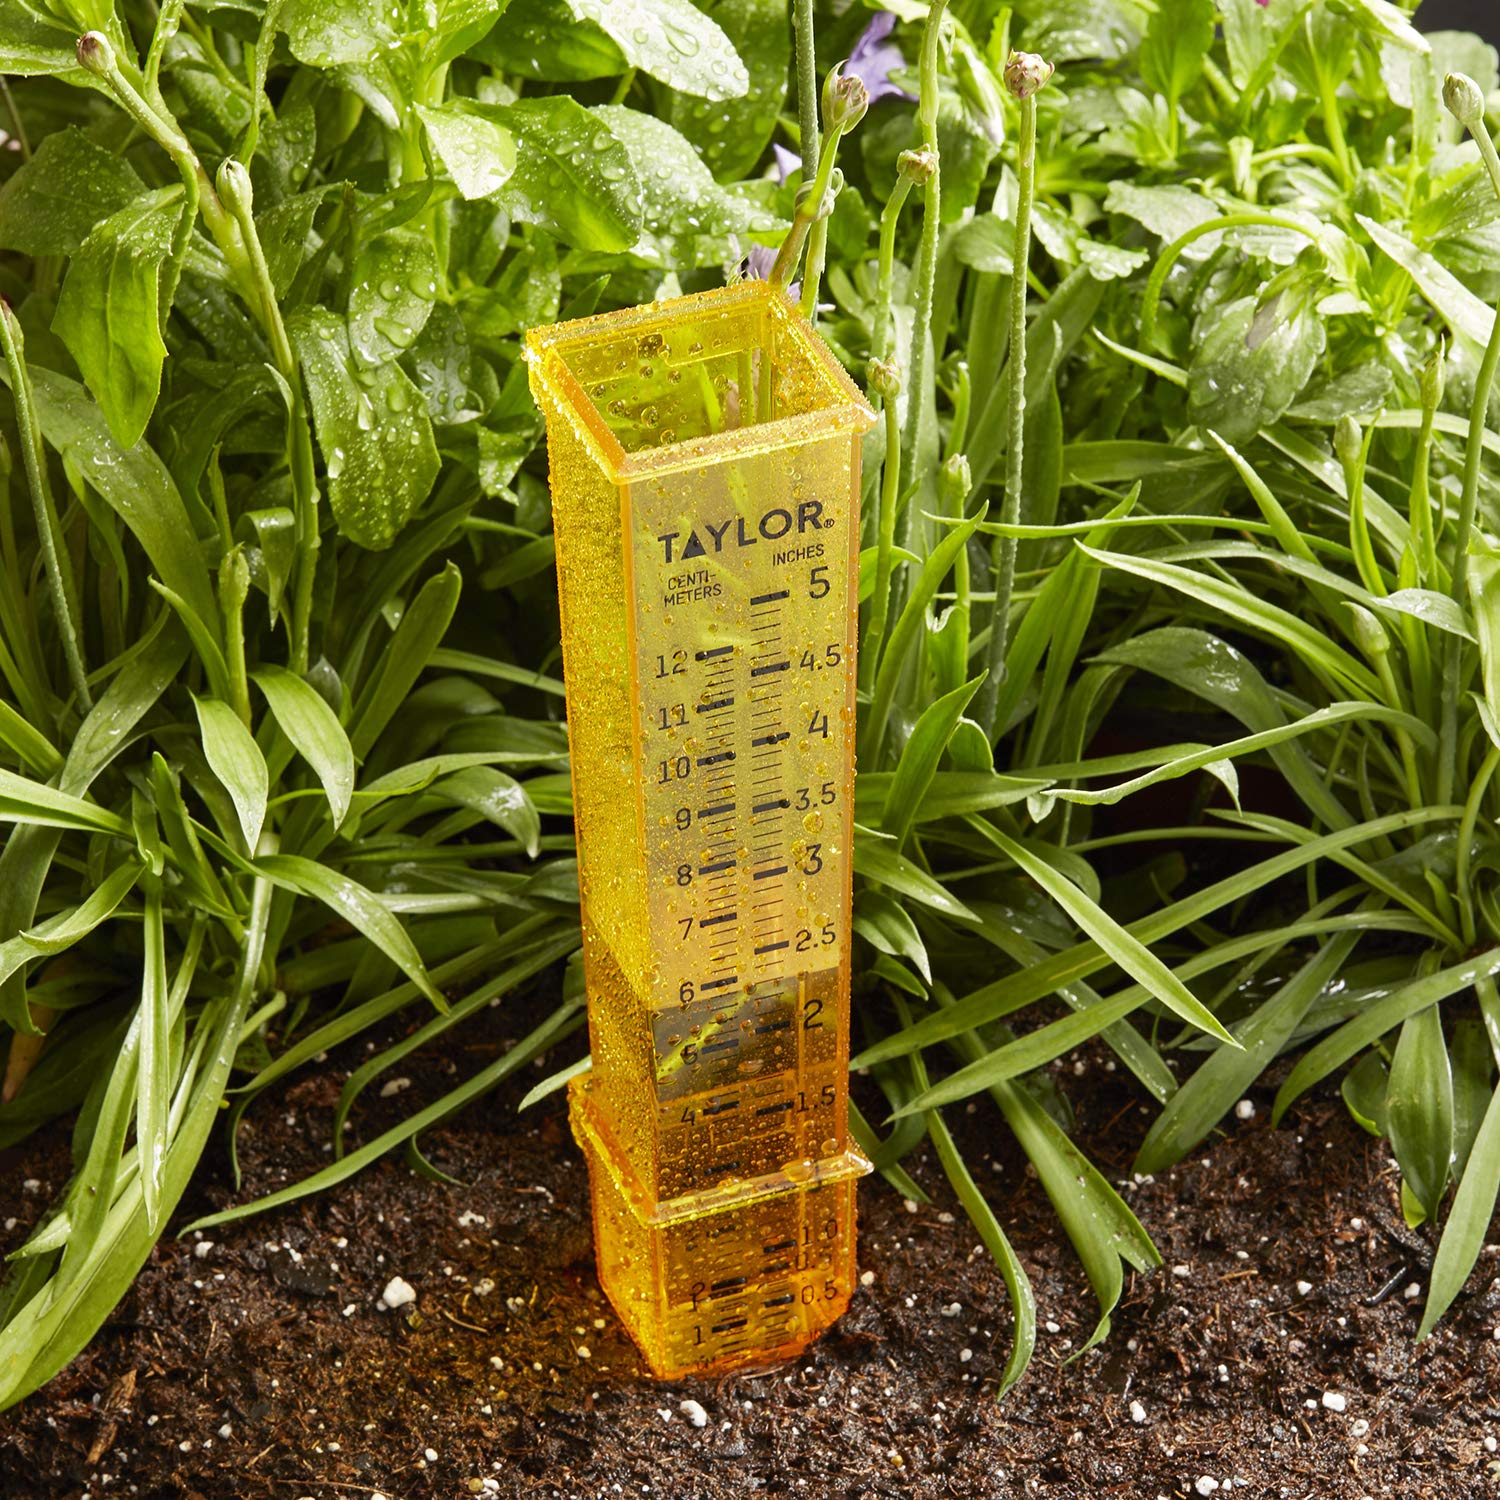 Taylor 2715 2-in-1 Rain/Sprinkler Gauge (Yellow) $2.99 + Free Shipping w/ Prime or on $35+